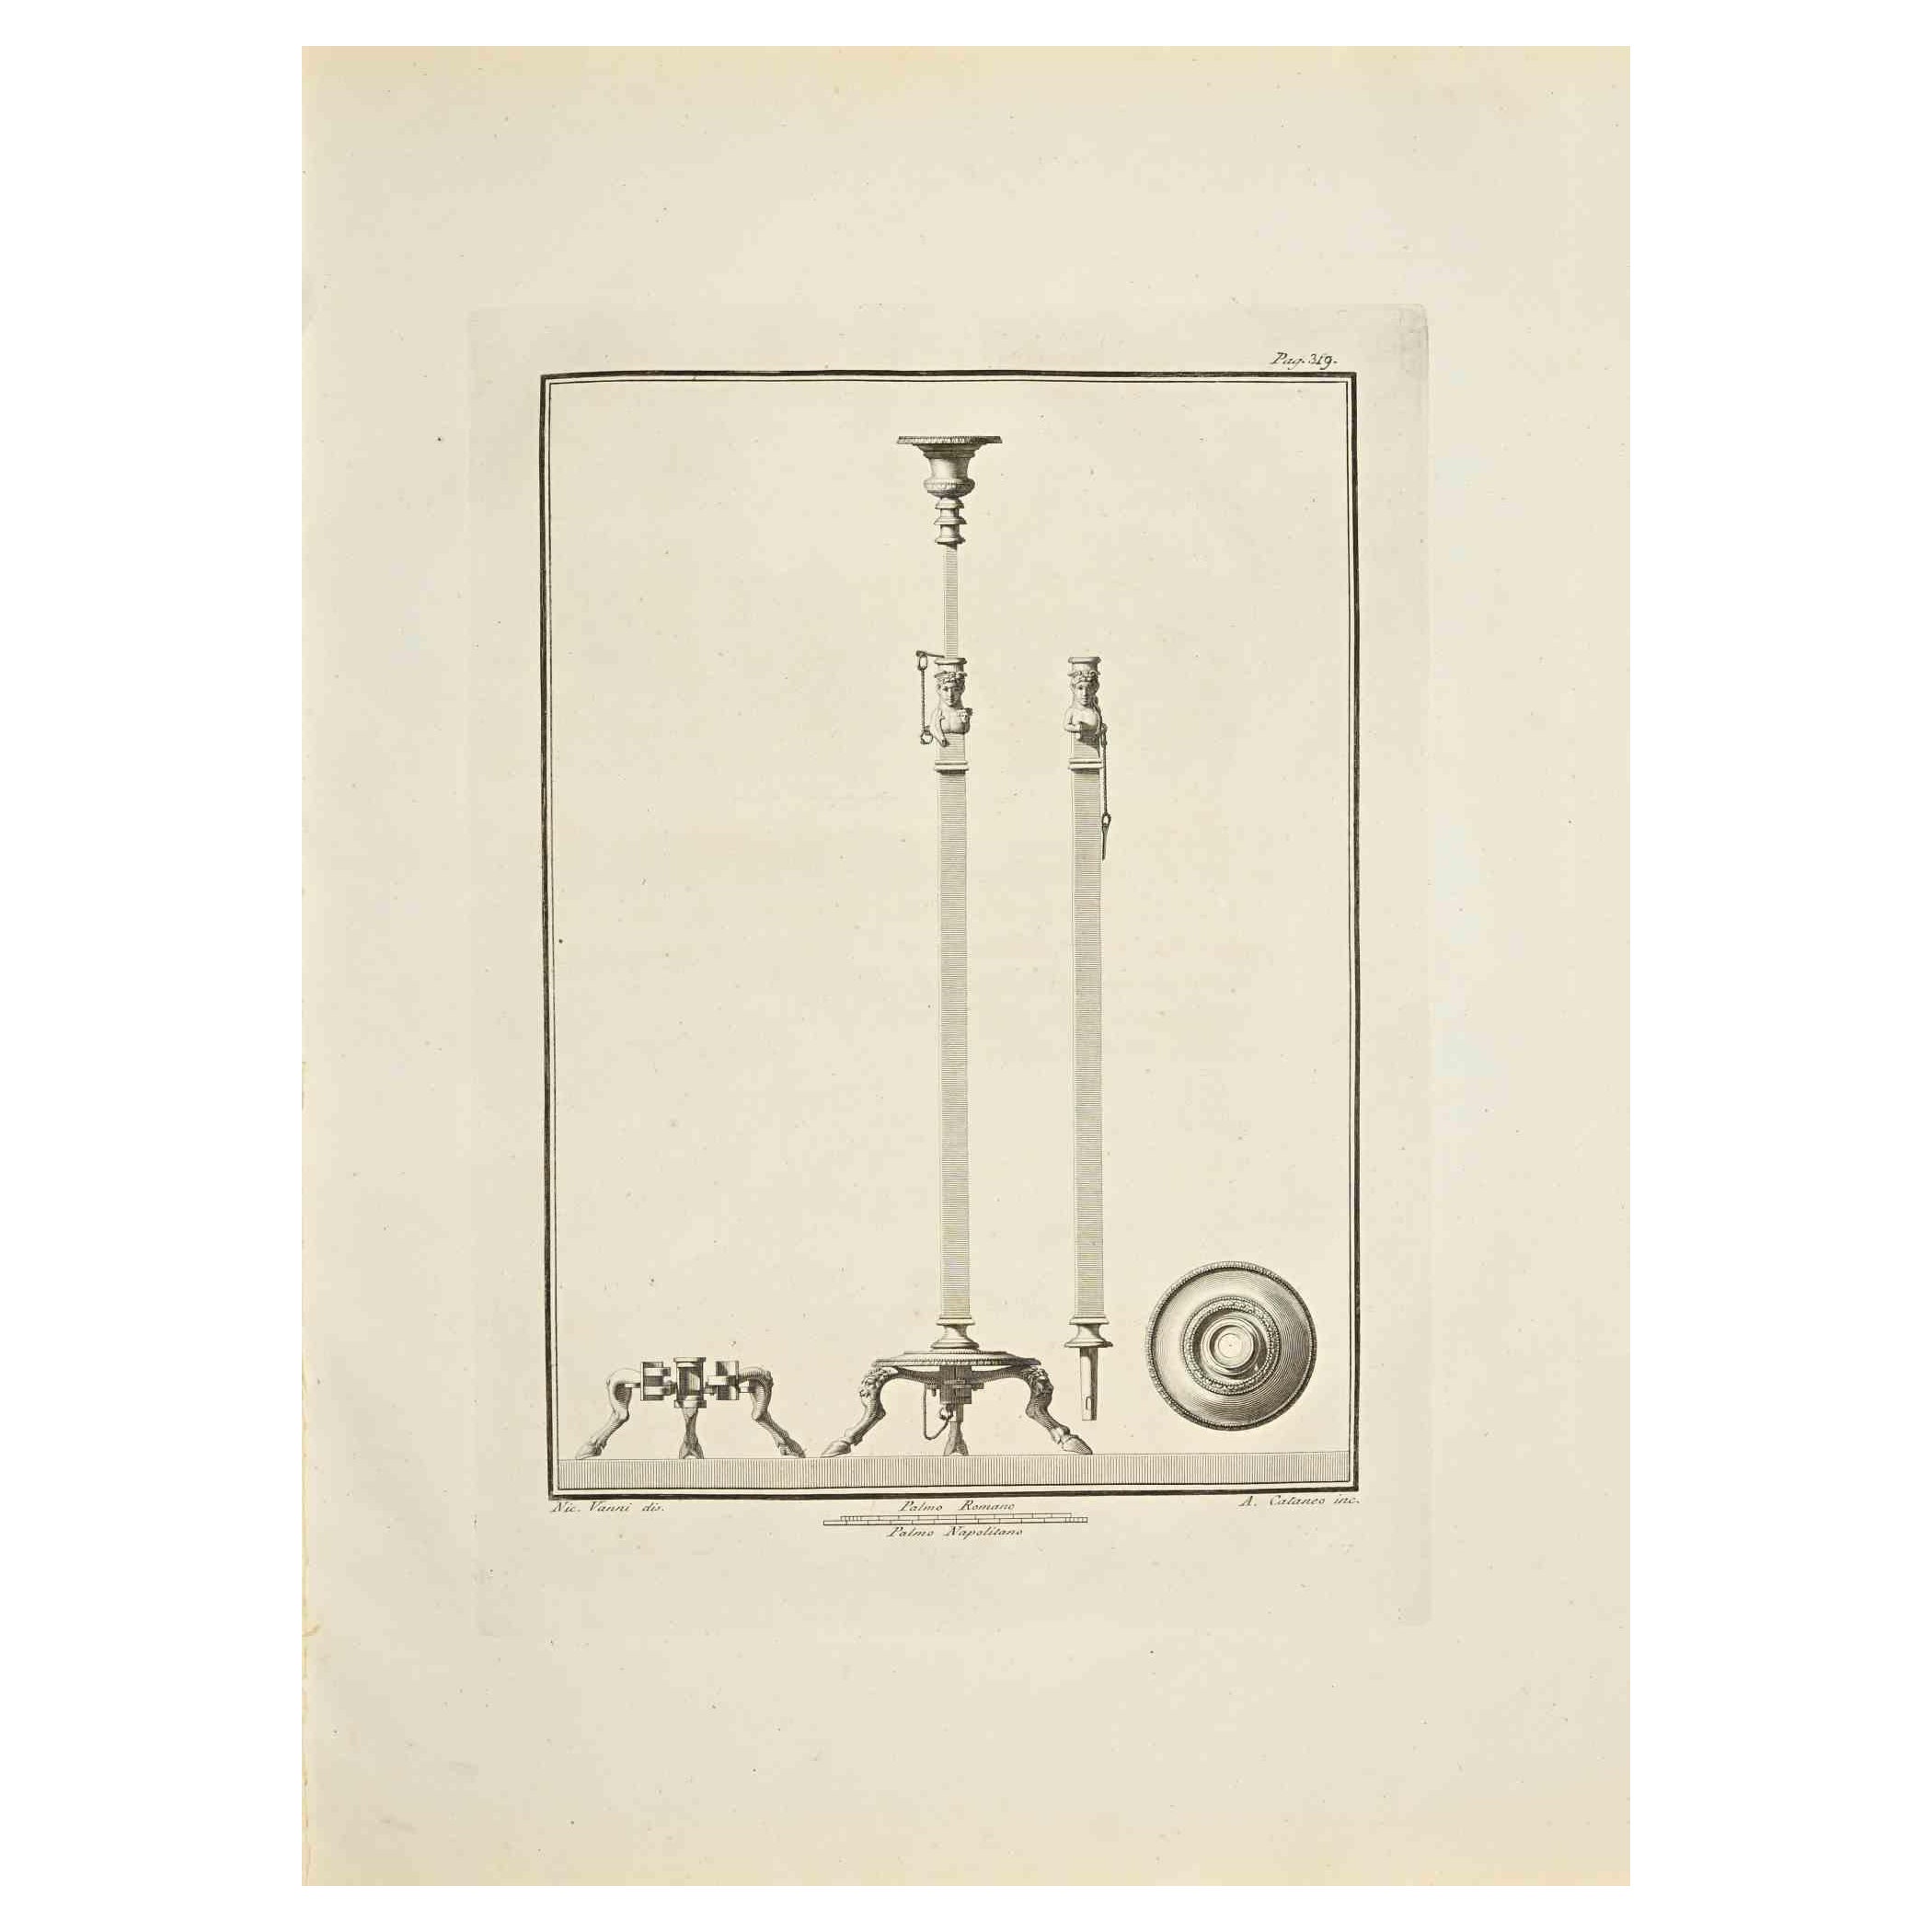 Ancient Roman Tripods from the series "Antiquities of Herculaneum", is an etching on paper realized by Nicola Vanni in the 18th Century.

Signed on the plate.

Good conditions except for some minor stains and a cutting on the part.

 

The etching